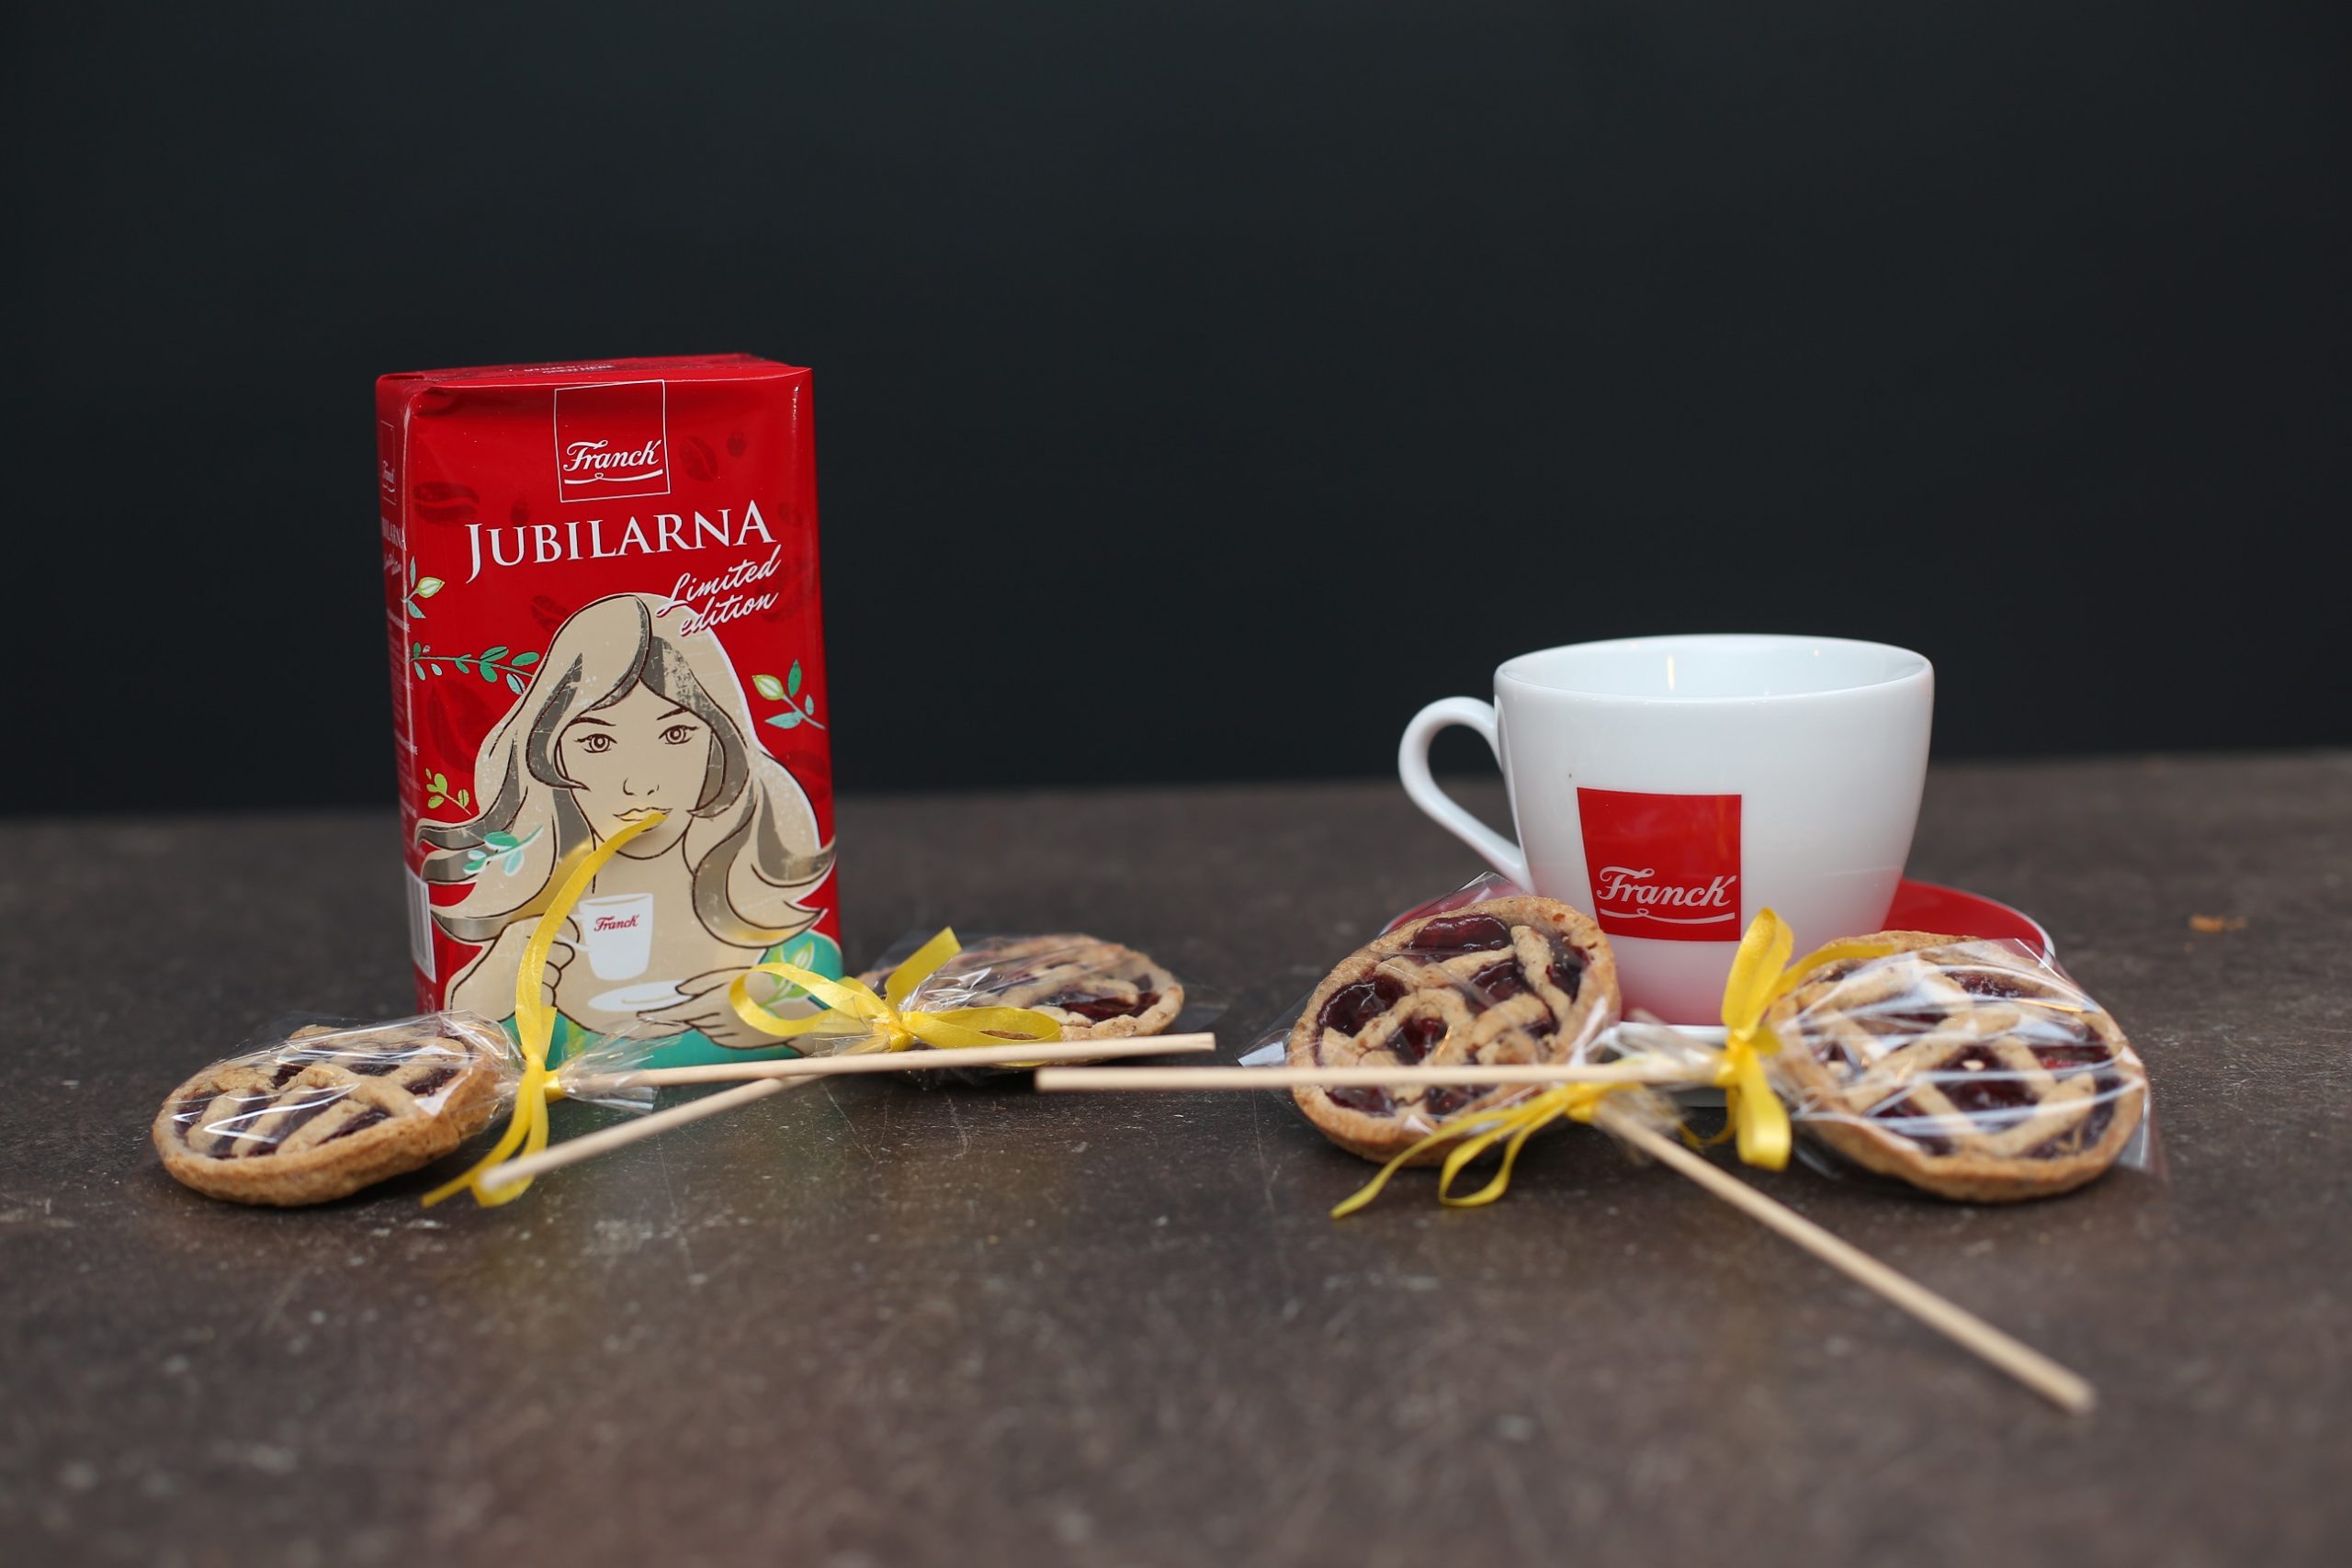 Leading Croatian Coffee Brand Now Available in 150 American Stores